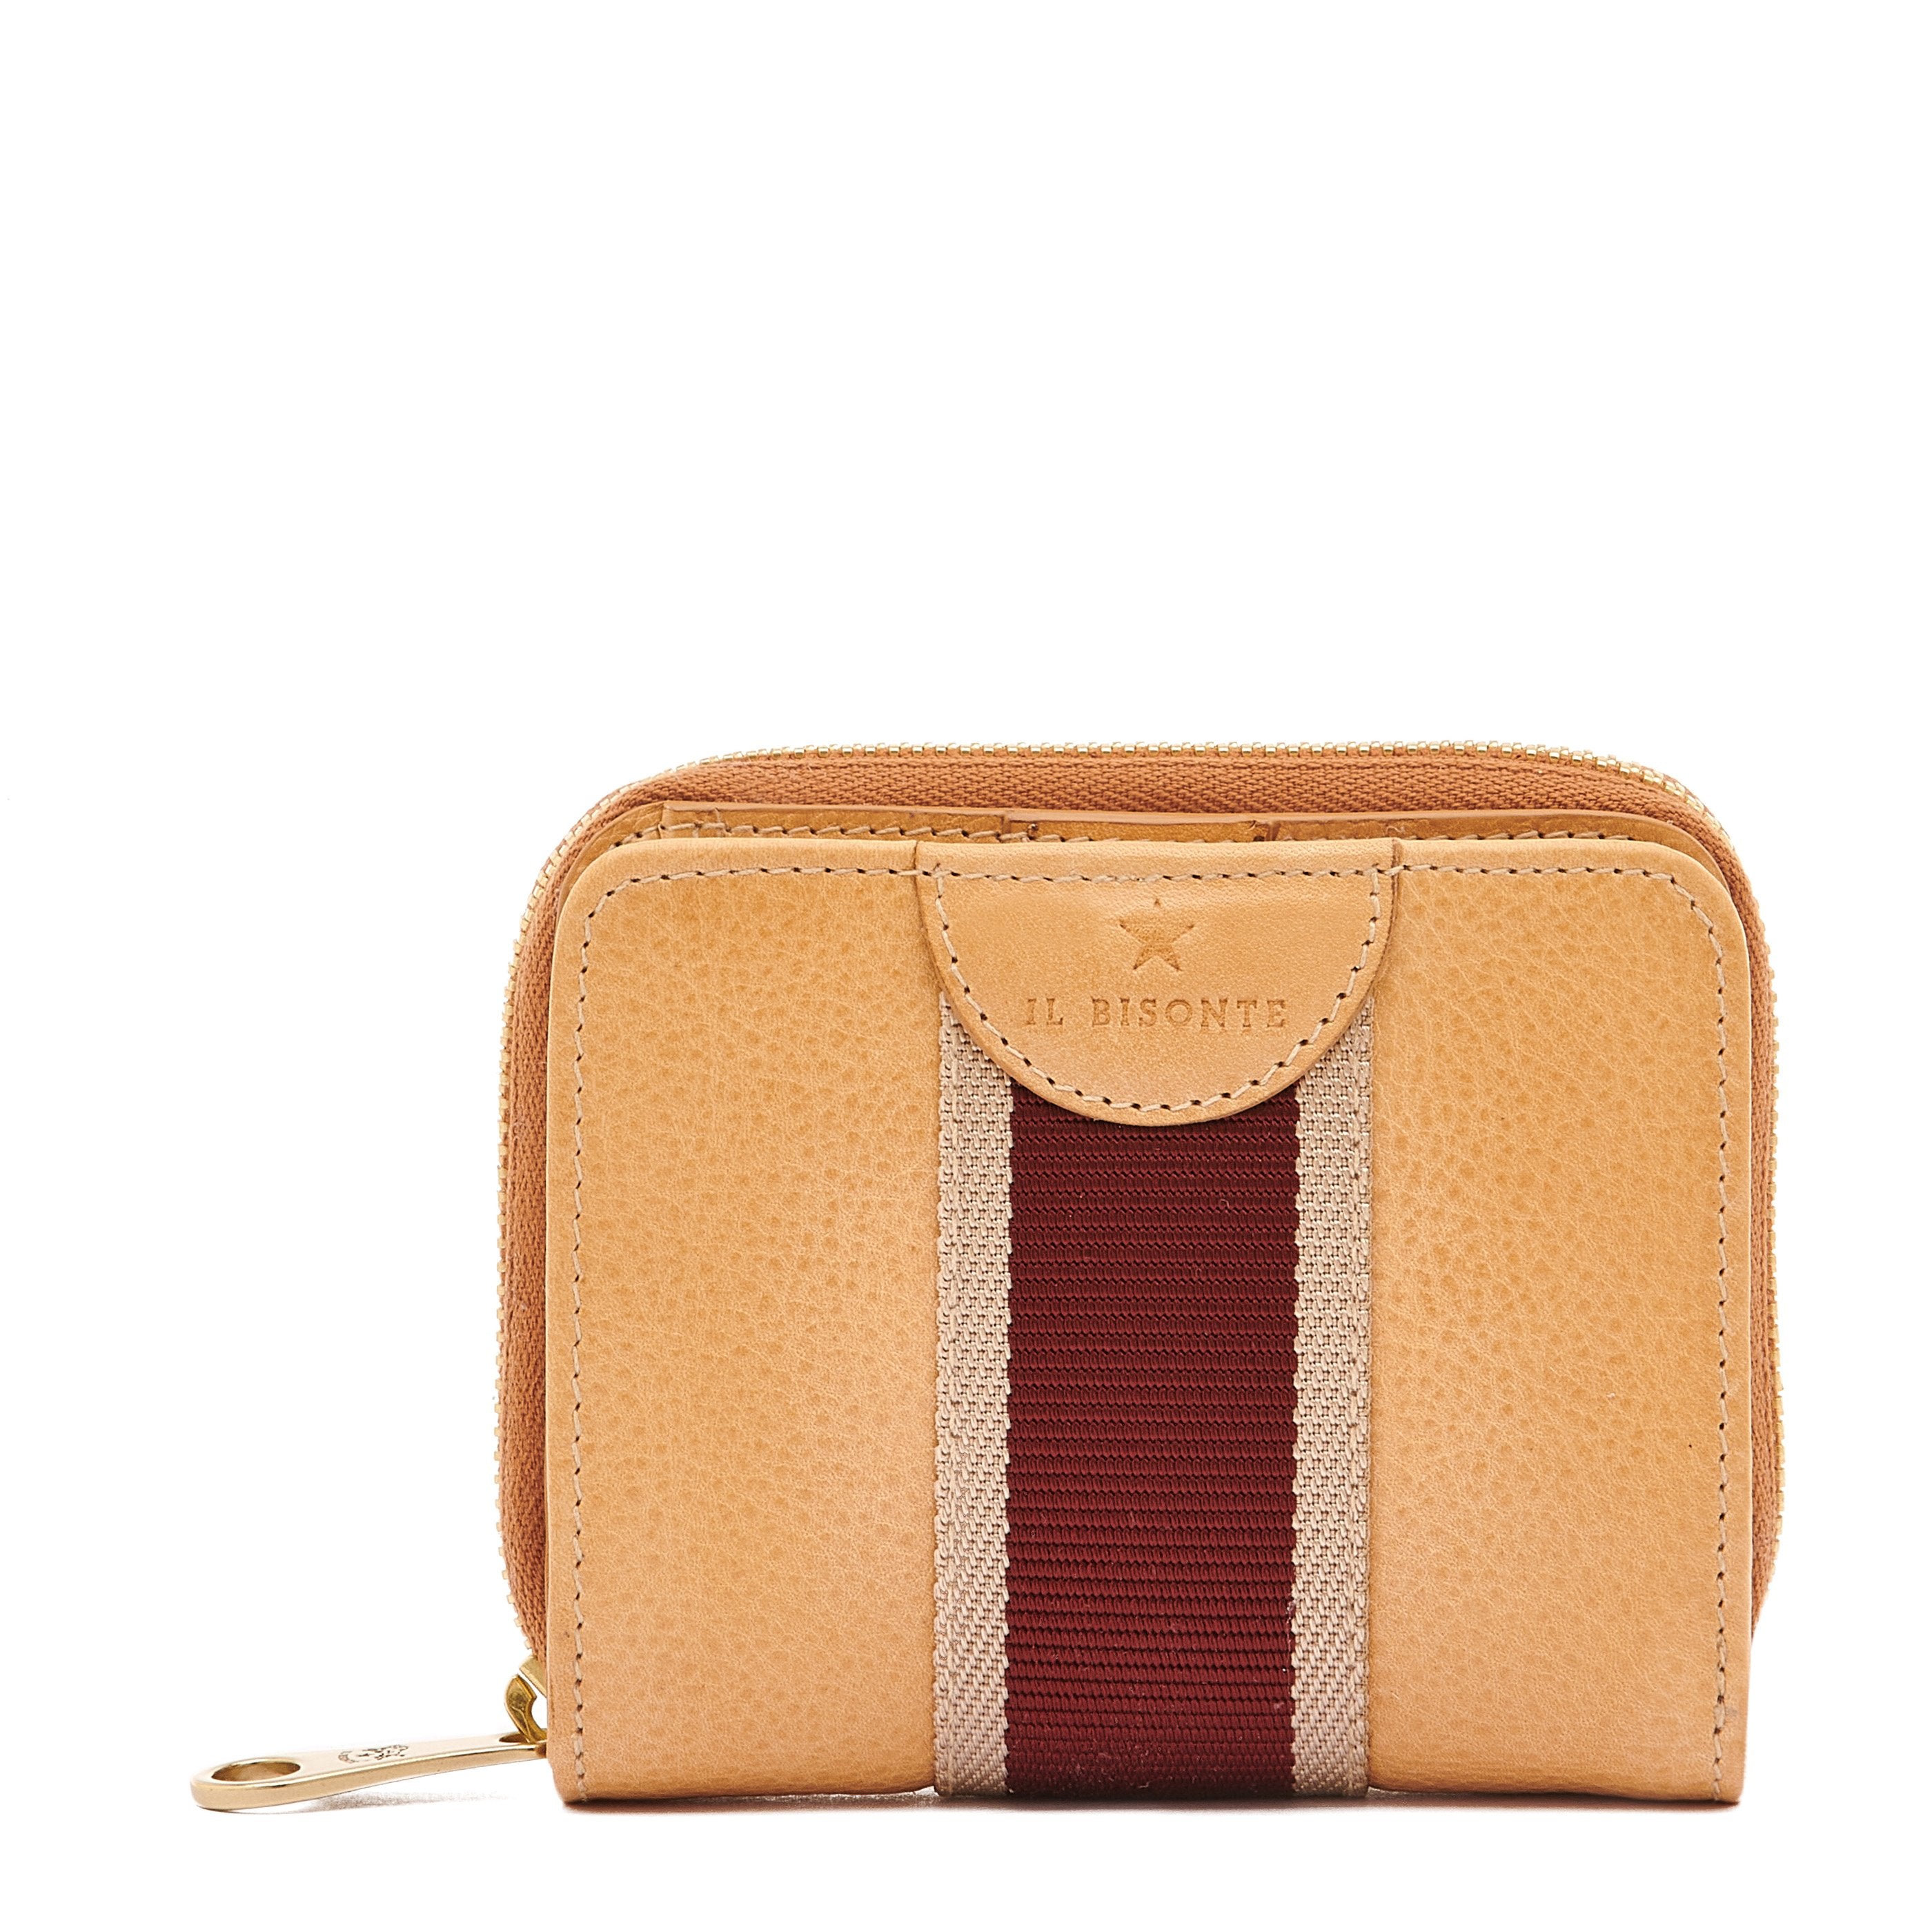 Solaria | Women's zip around wallet in leather color natural